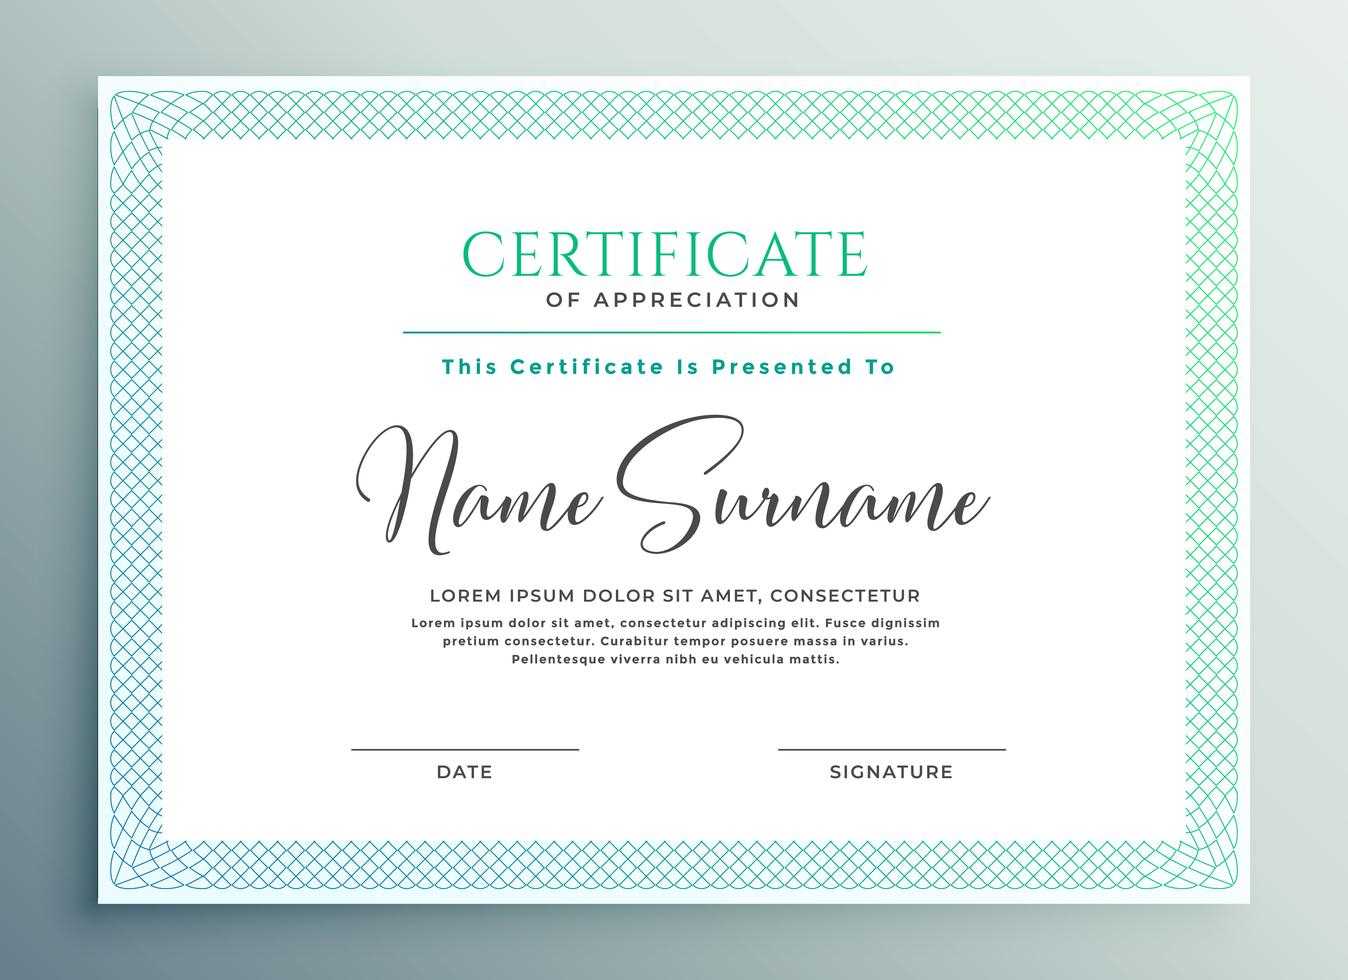 30+ Certificate Of Appreciation Download!! | Templates Study Inside Certificate Of Appreciation Template Free Printable